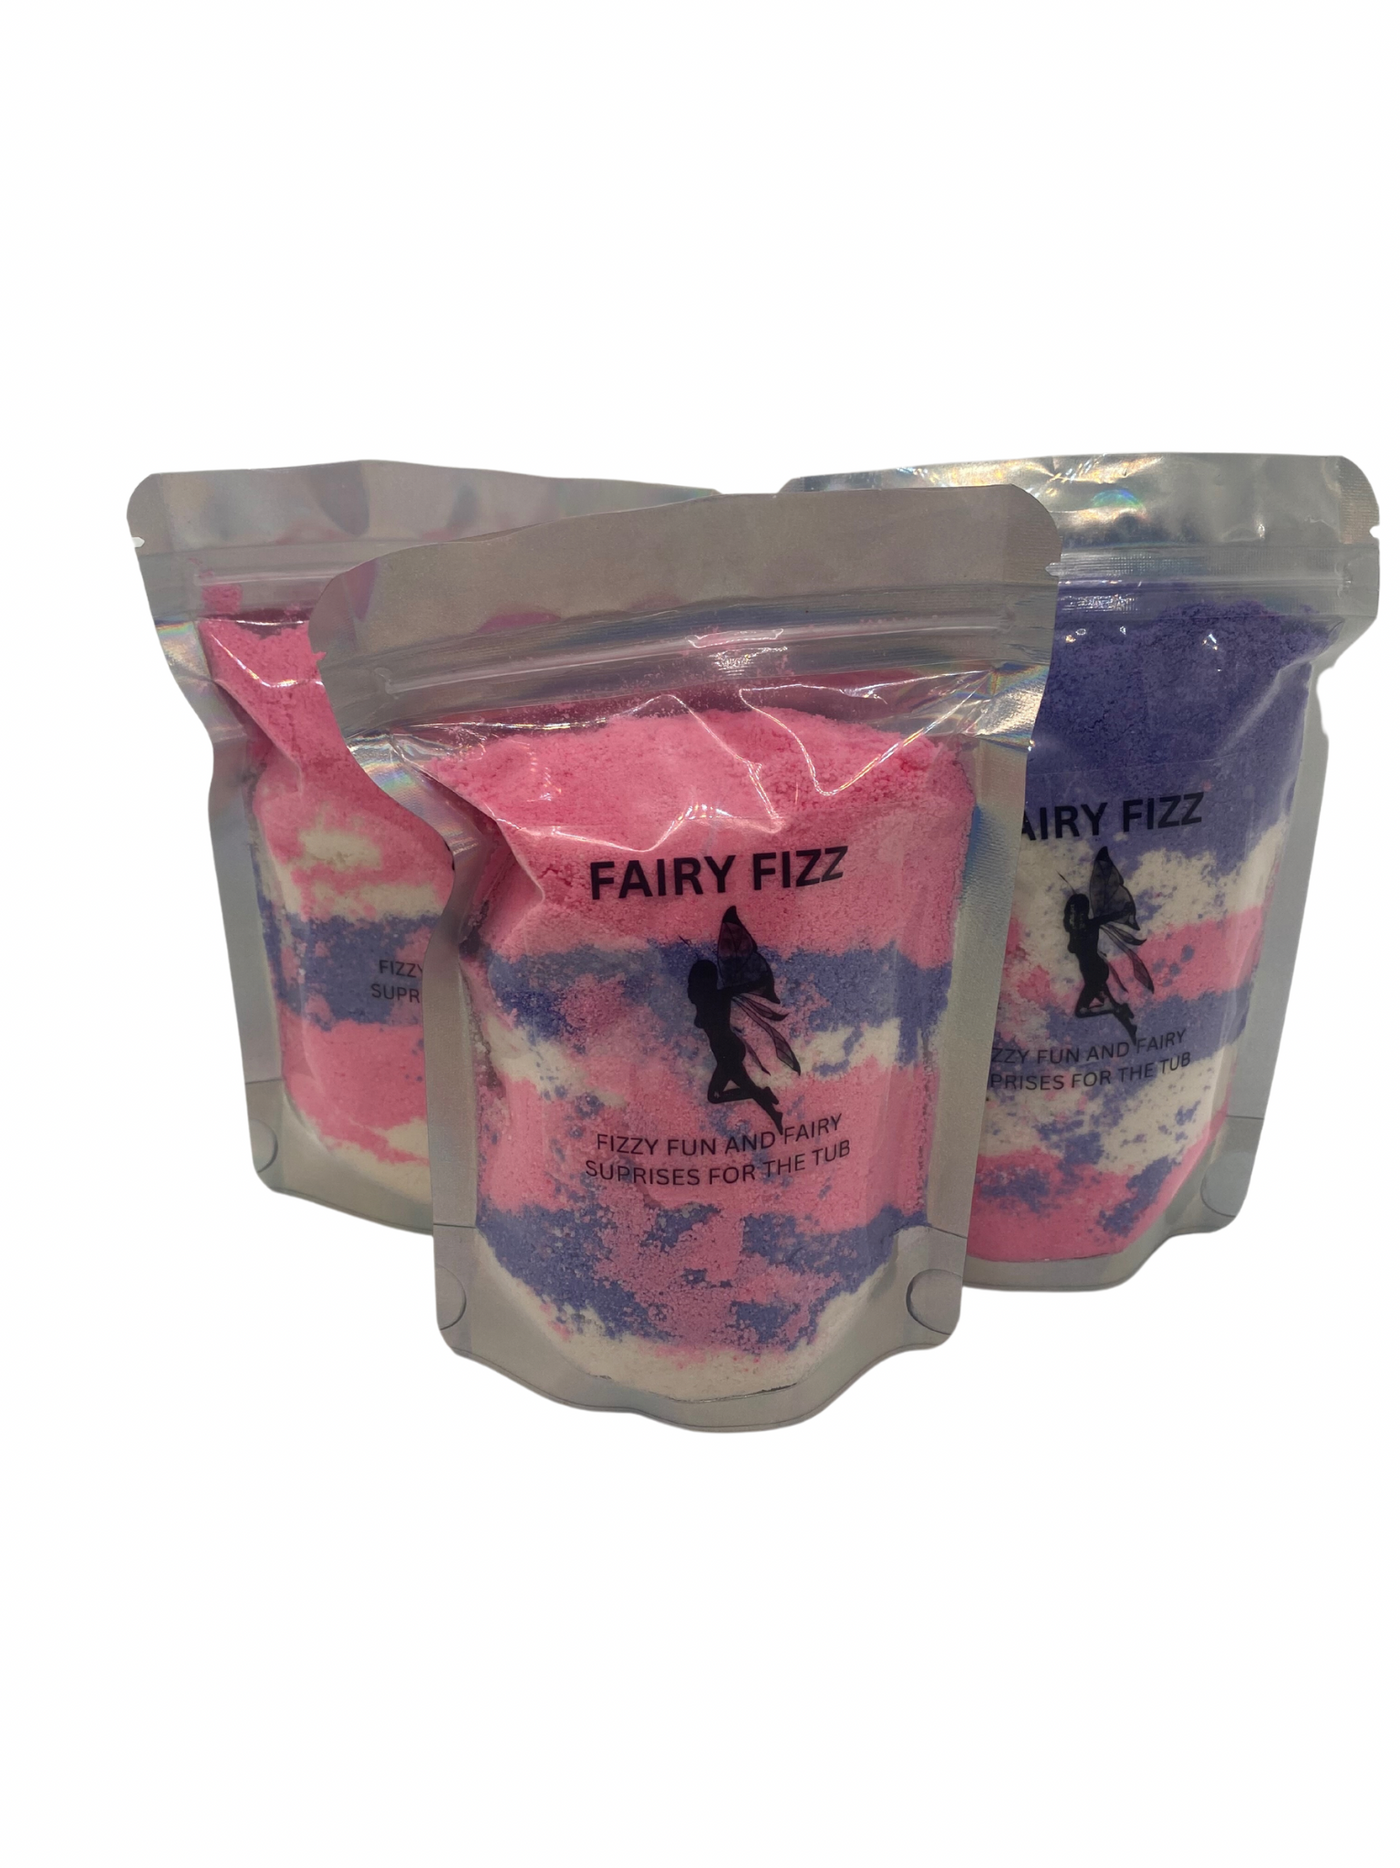 Fairy Fizz | Bath Dust | Prizes | Buttermilk Soak | Bath Fizzy | Natural Oils & Butters | Self Care Gift | Gift for Her | Milk Bath | Spa Gift | Gift for Him